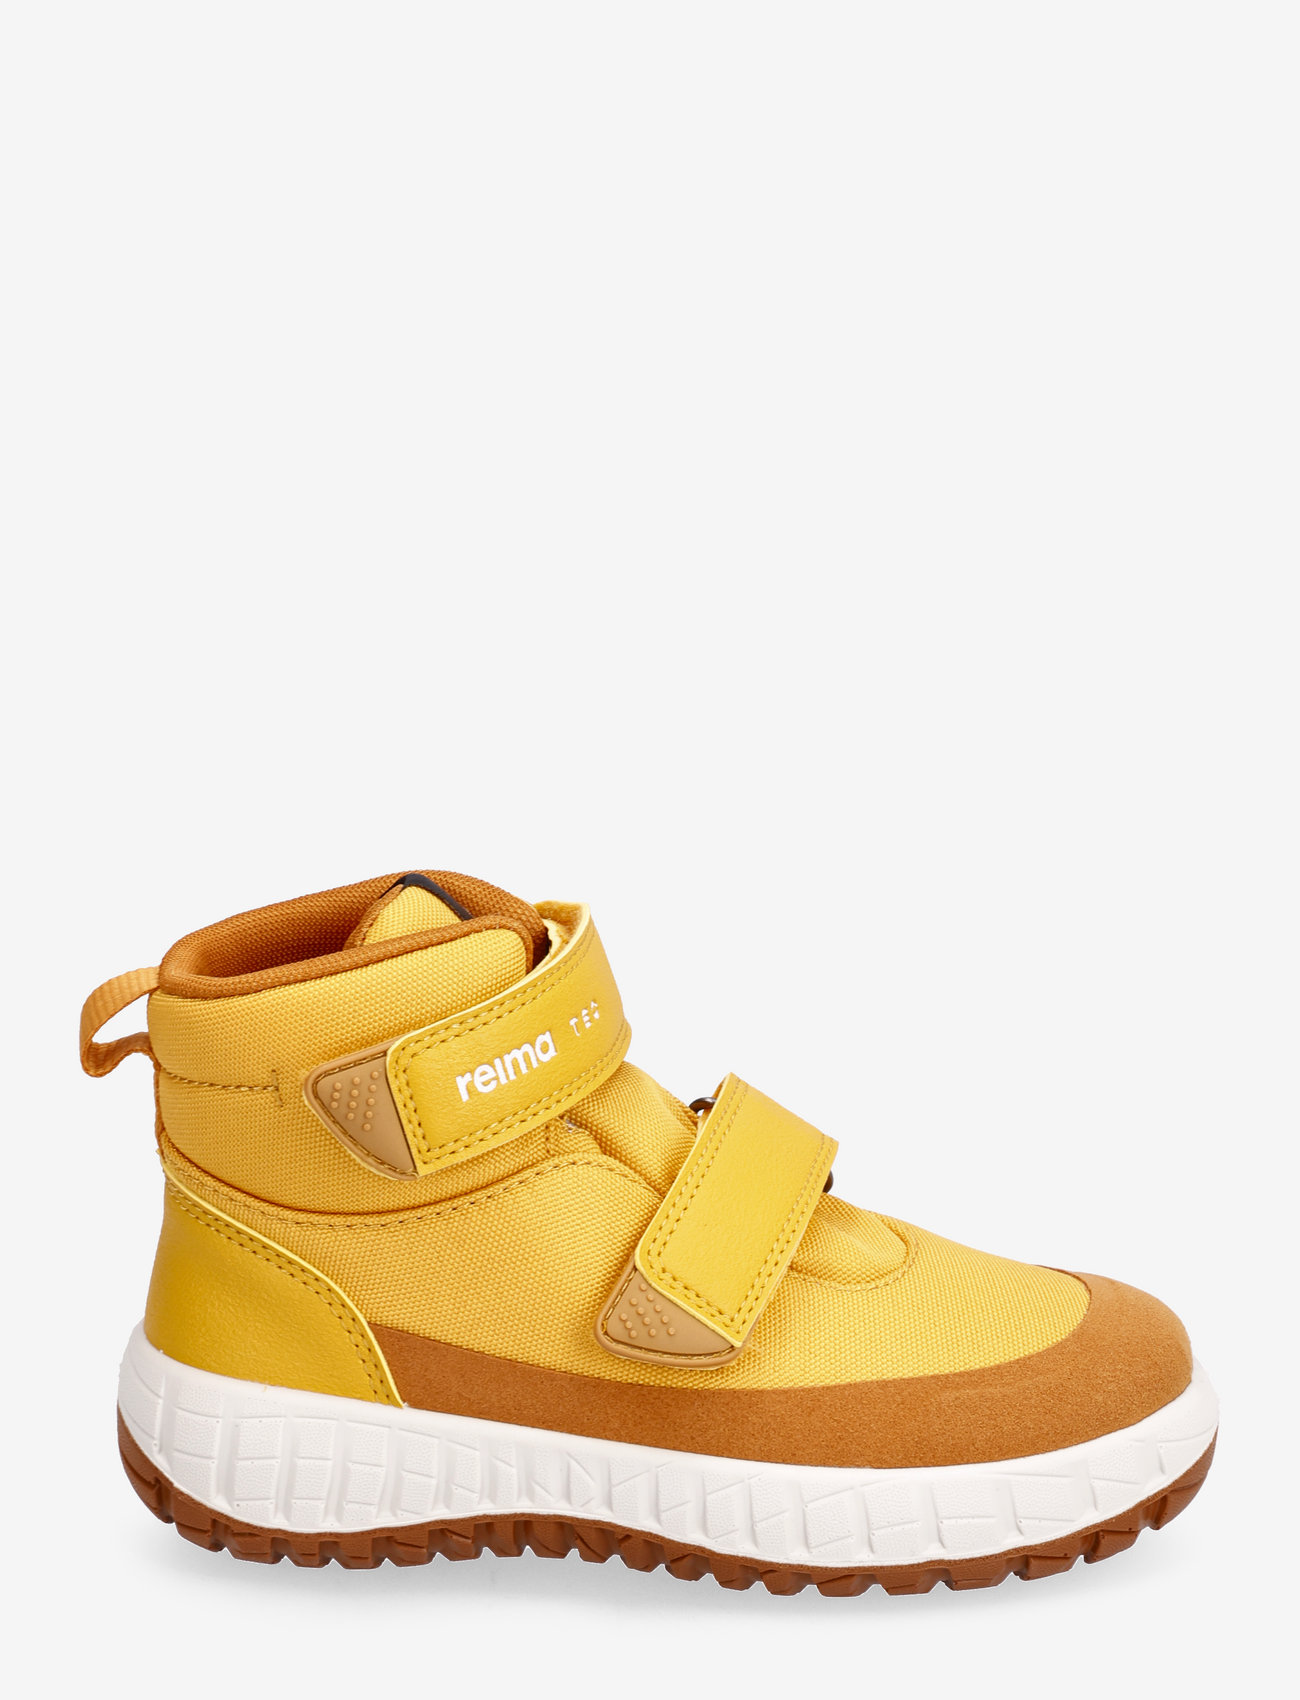 Reima - Reimatec shoes, Patter 2.0 - high tops - ochre yellow - 1